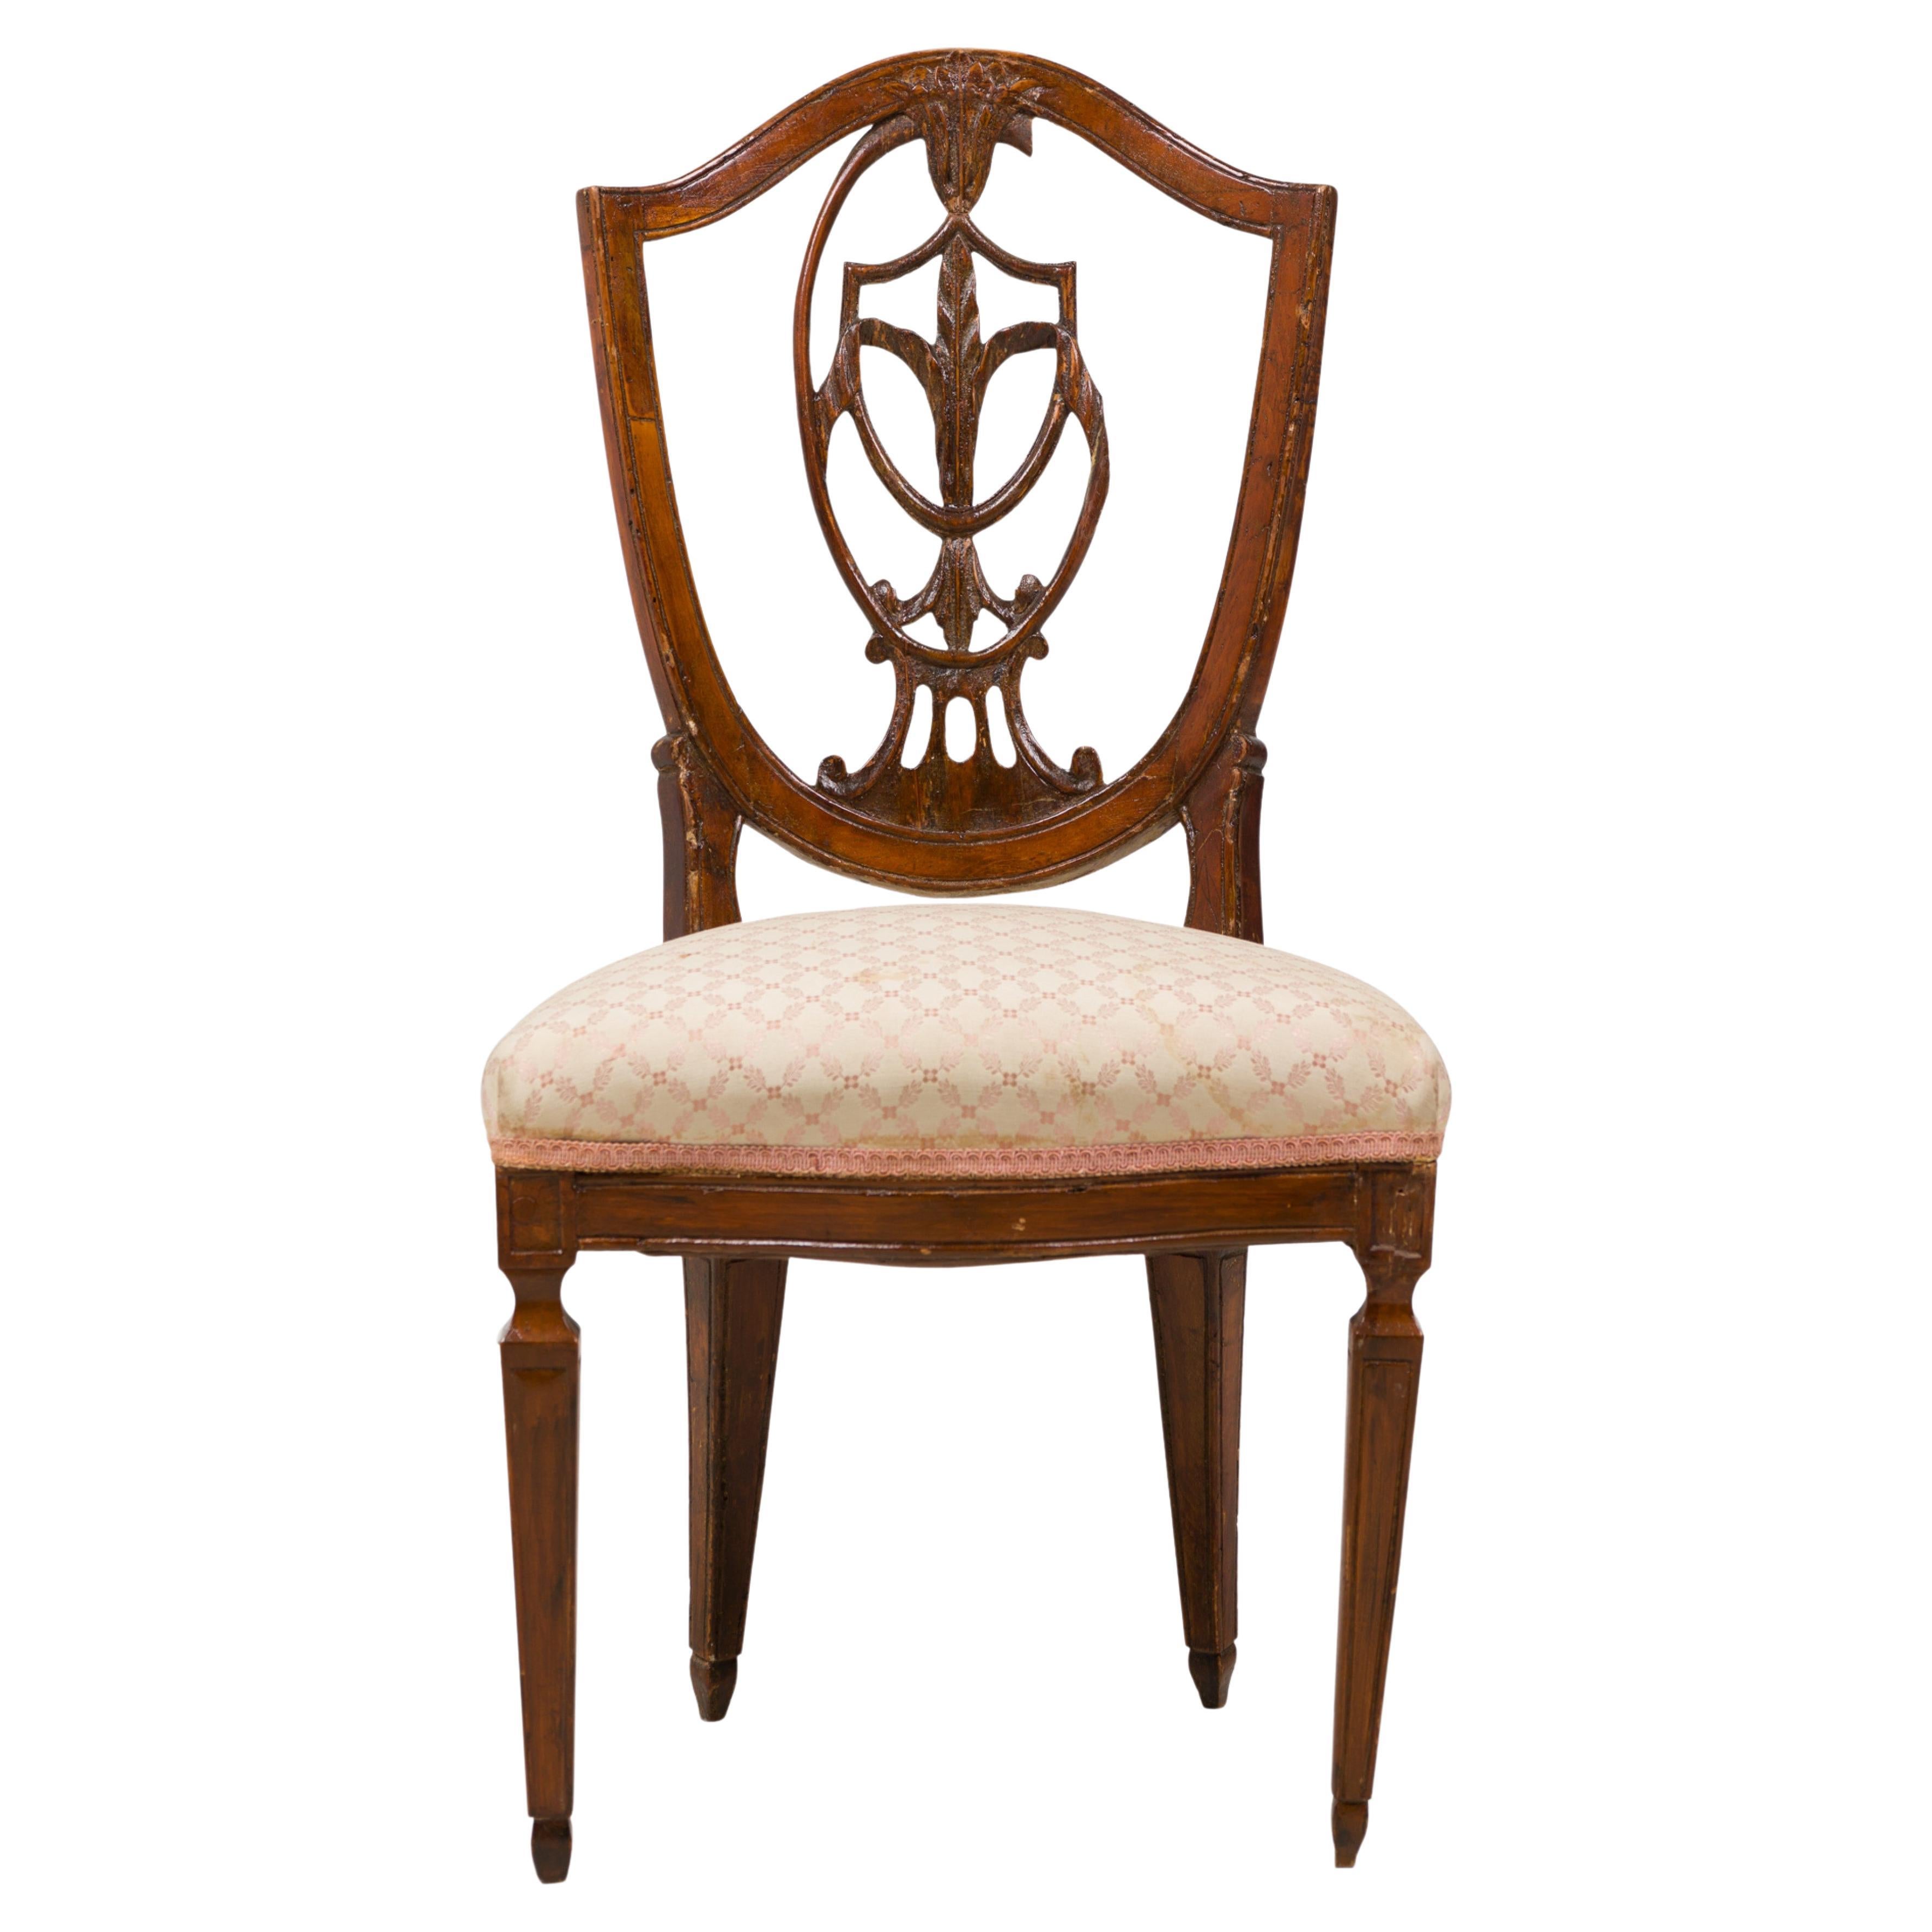 Italian Neoclassic Shield Back Dining/Side Chair W/ Floral Beige Upholstery For Sale